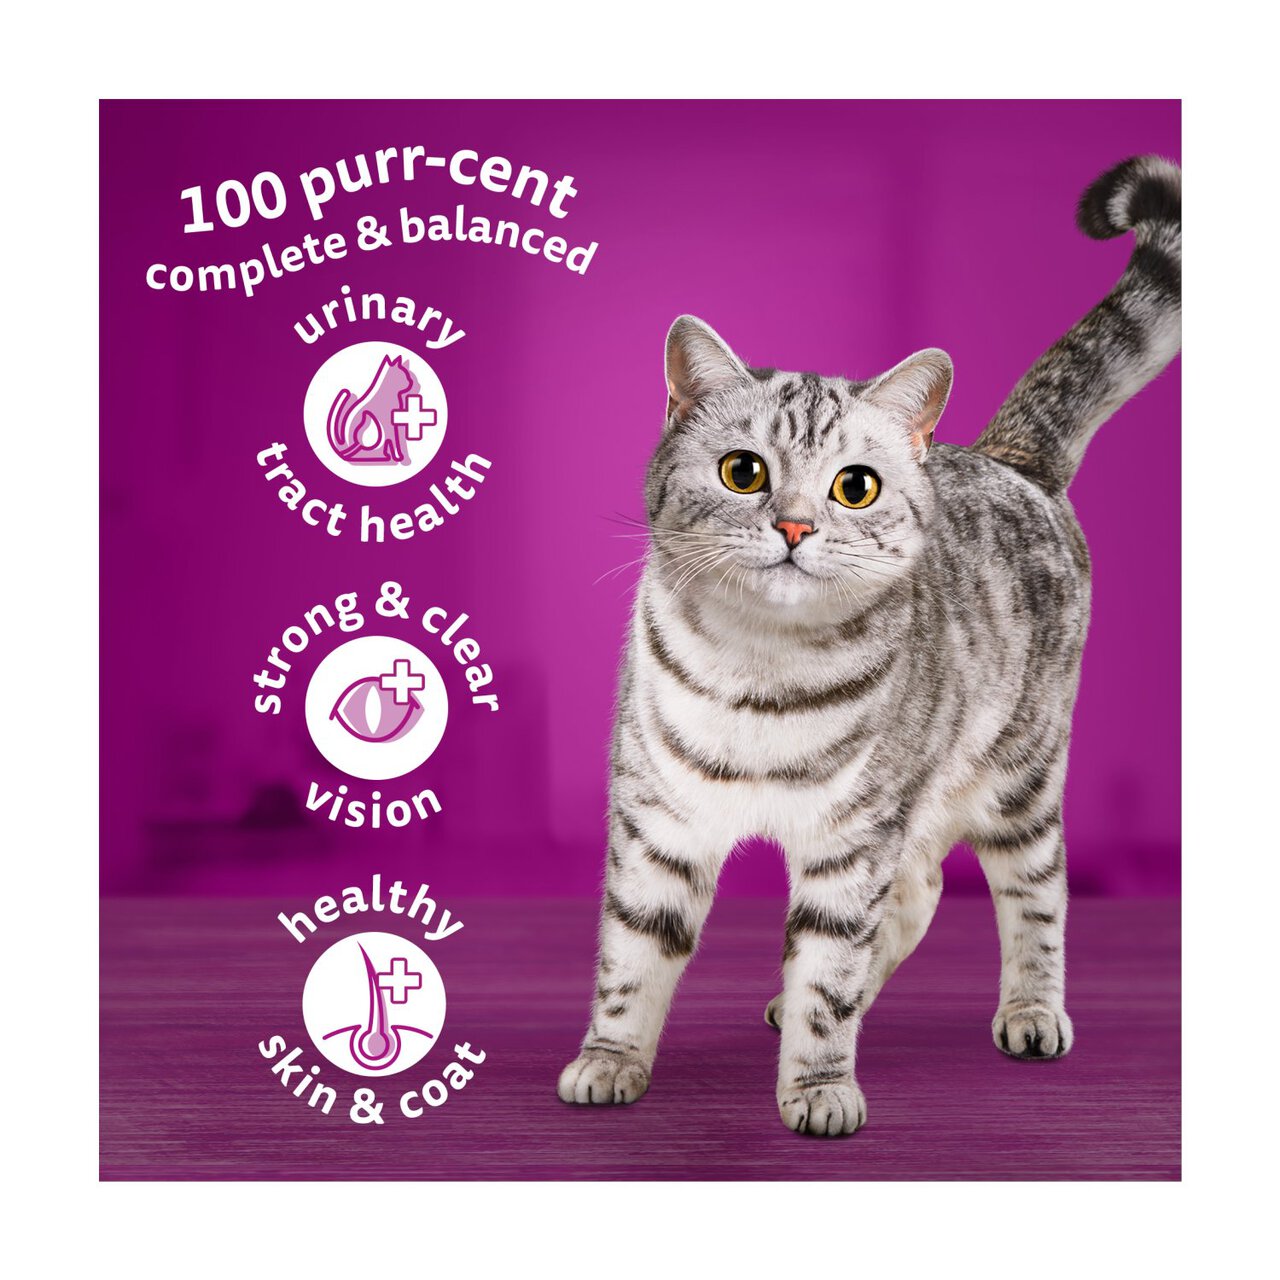 WHISKAS 1+ Cat Complete Dry with Chicken 1.9kg